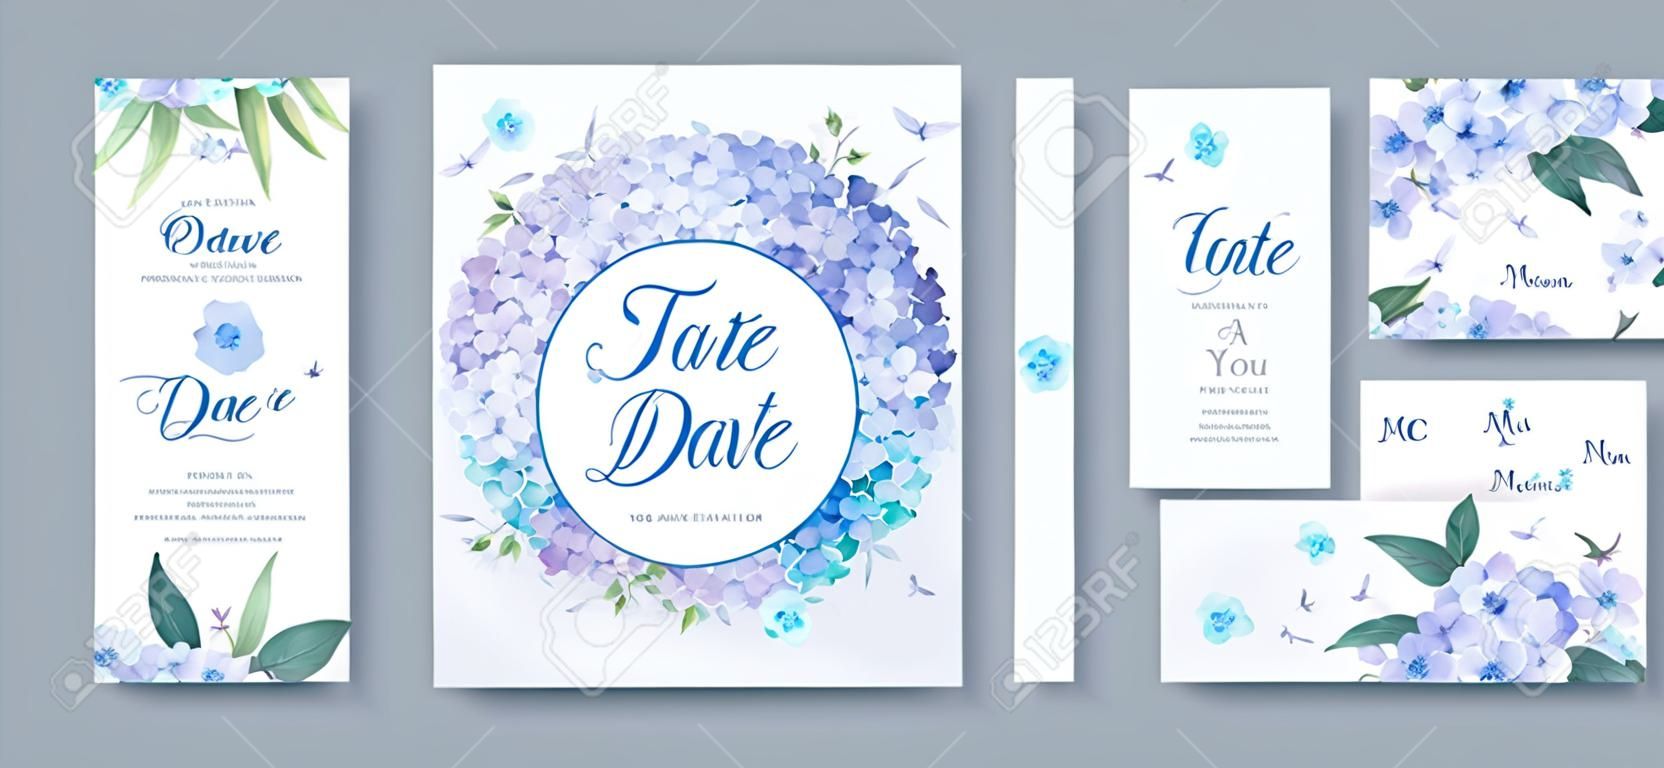 Wedding invitation card template. Floral design with blooming flowers of light-blue and violet Phloxes, green leaves. Vector illustration in delicate pastel palette